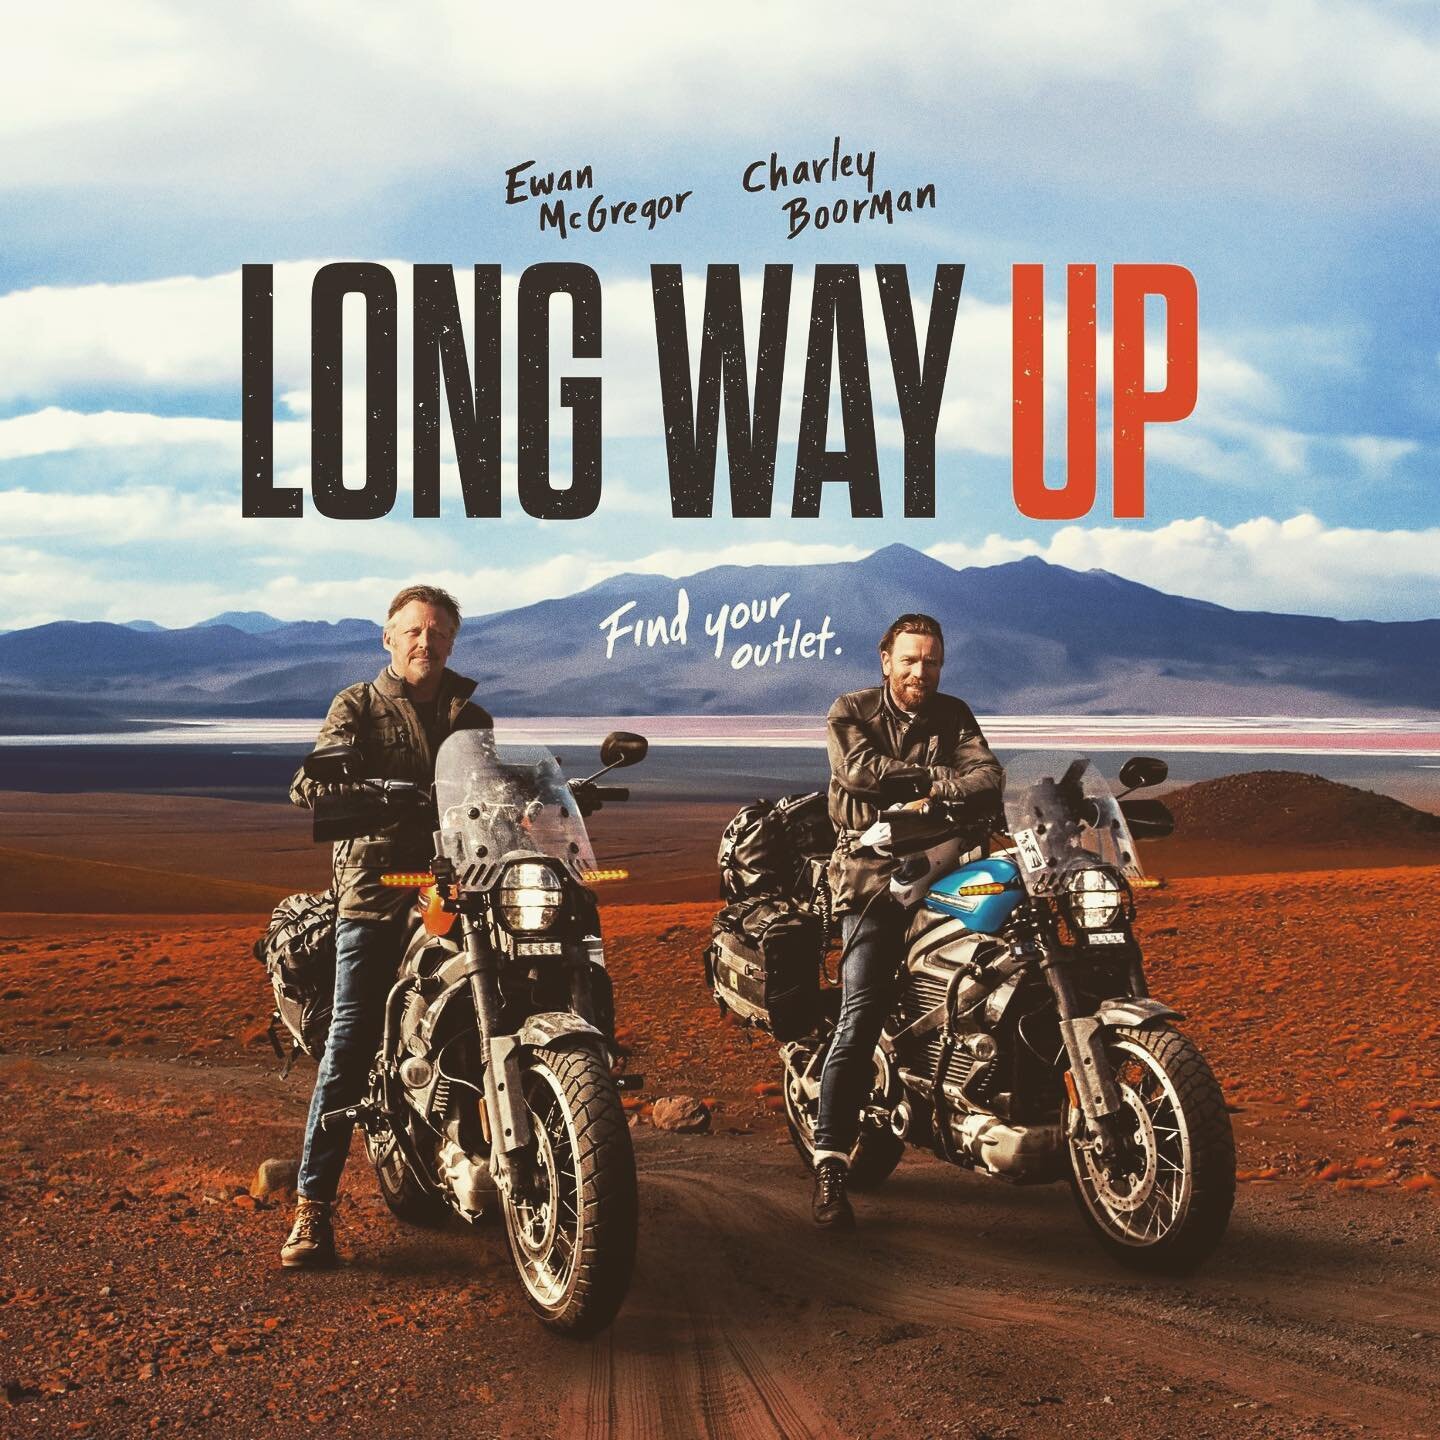 Last week saw the finale of Long Way Up air on @appletv . Showcasing a monster of a soundtrack available on @applemusic .

We'll be posting some curated playlists of our favourite tunes from south and Central America in the coming weeks.

#longwayup 